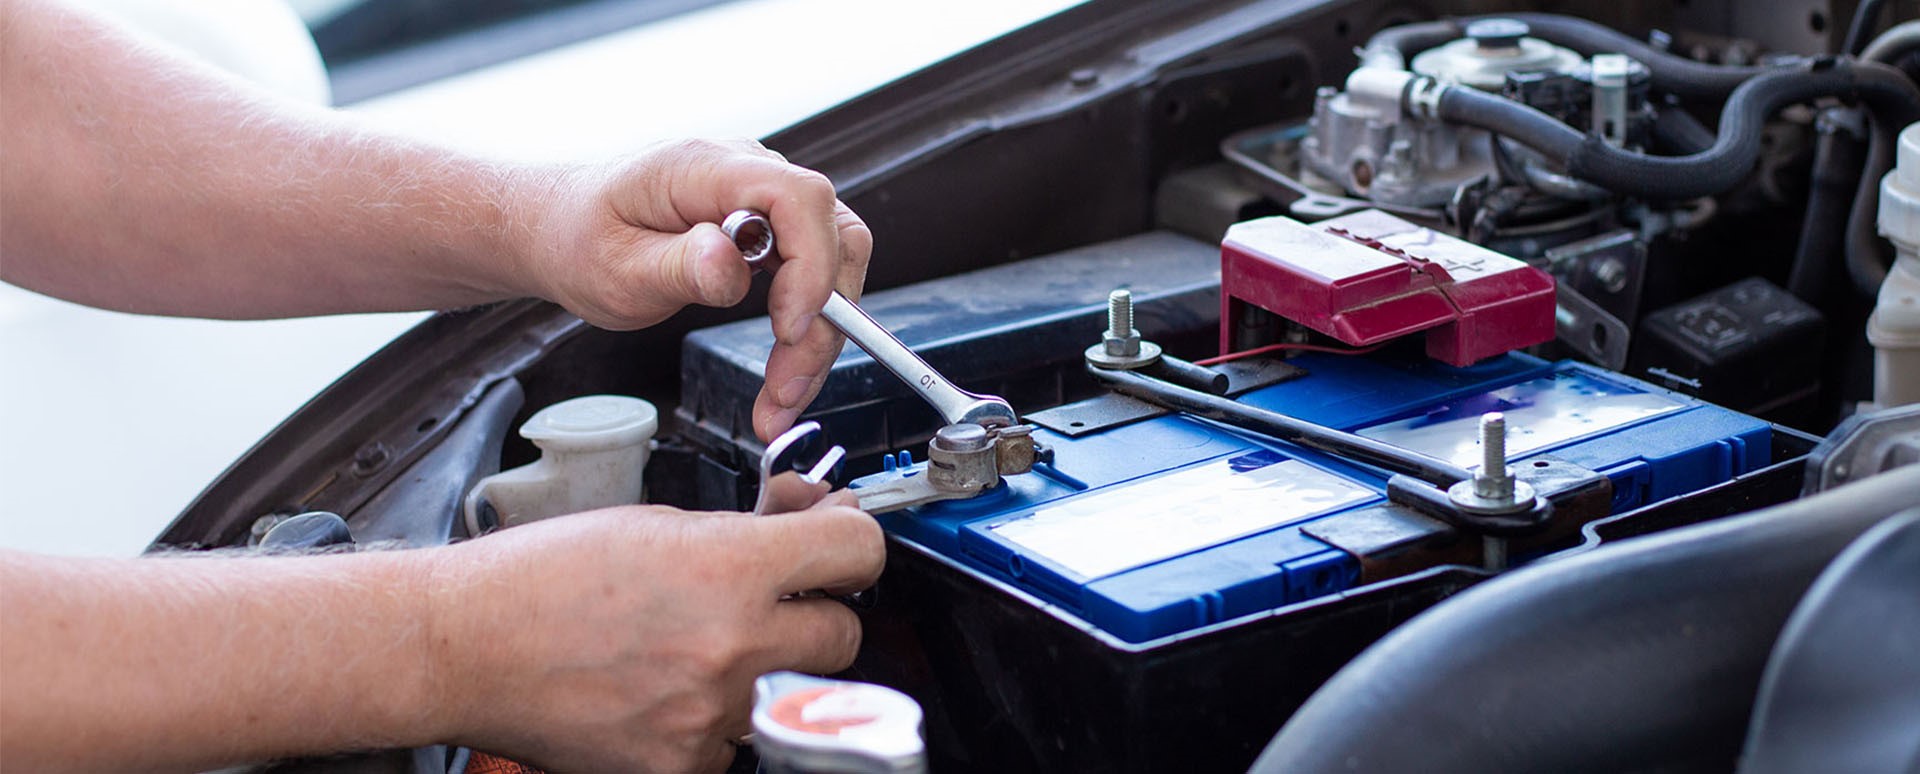 Tips For Maintaining Car Batteries In Cold Weather